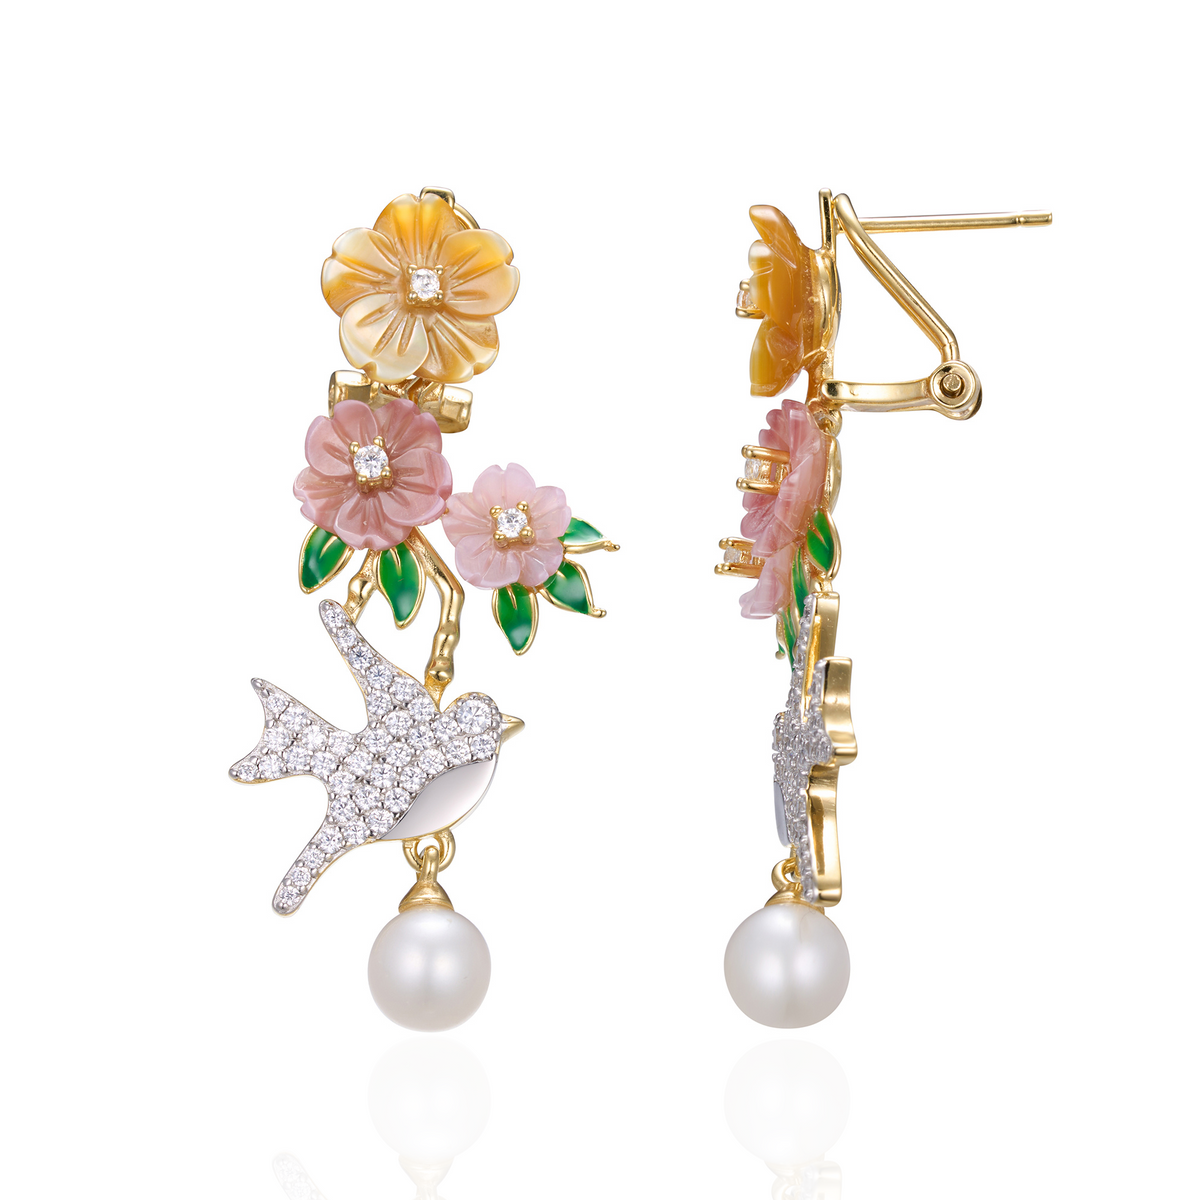 A pair of gold plated earrings with pearls, green stones, yellow, purple, pink shell flowers and a bird charm.